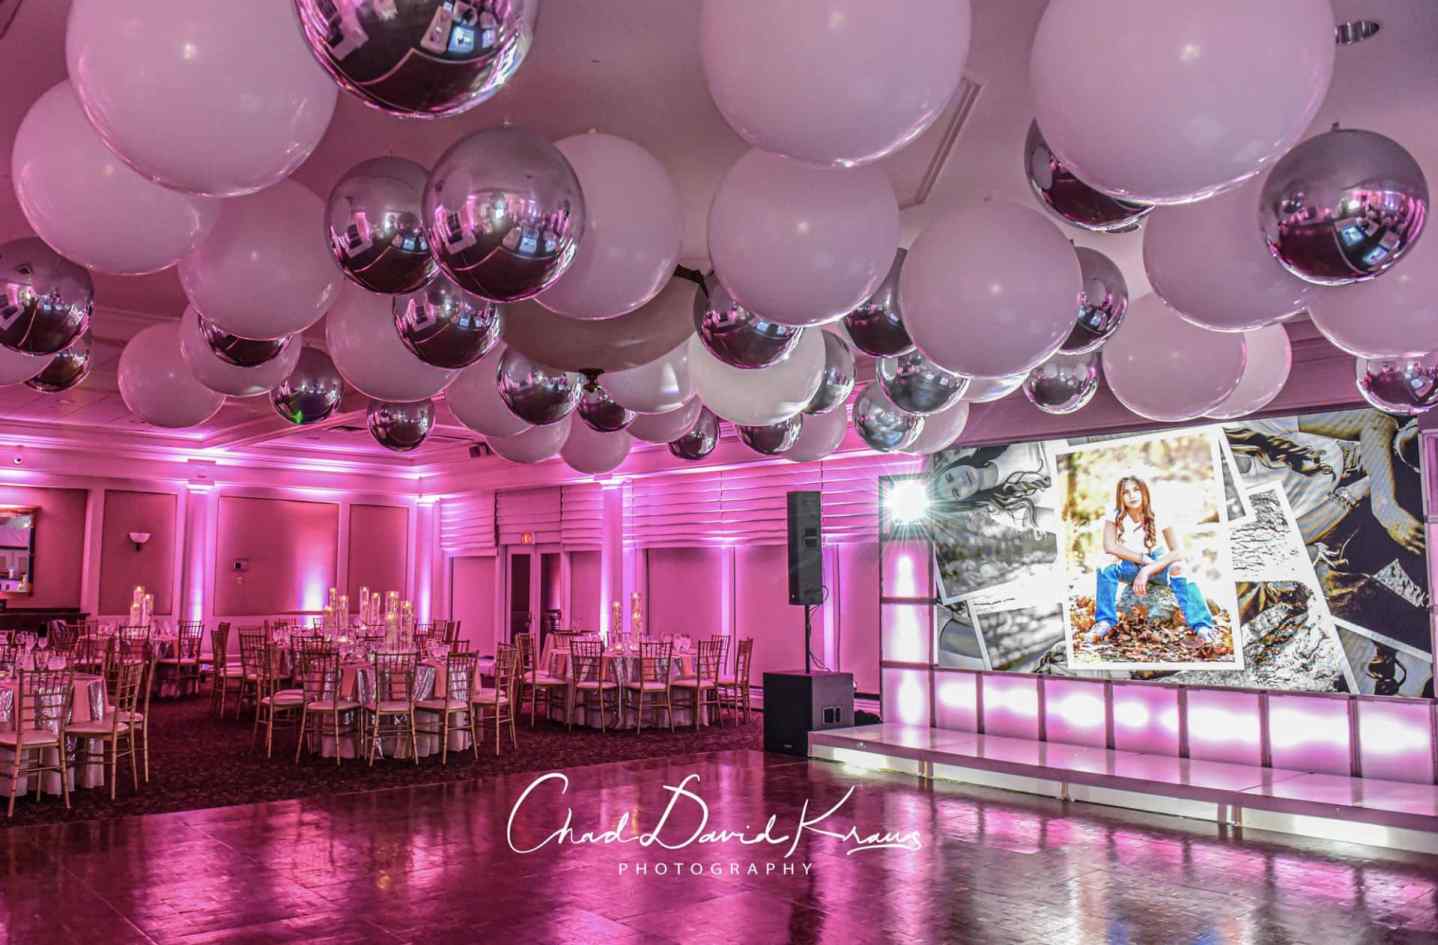 Indoor False ceilings - Fabric ceilings and walls for wedding or party